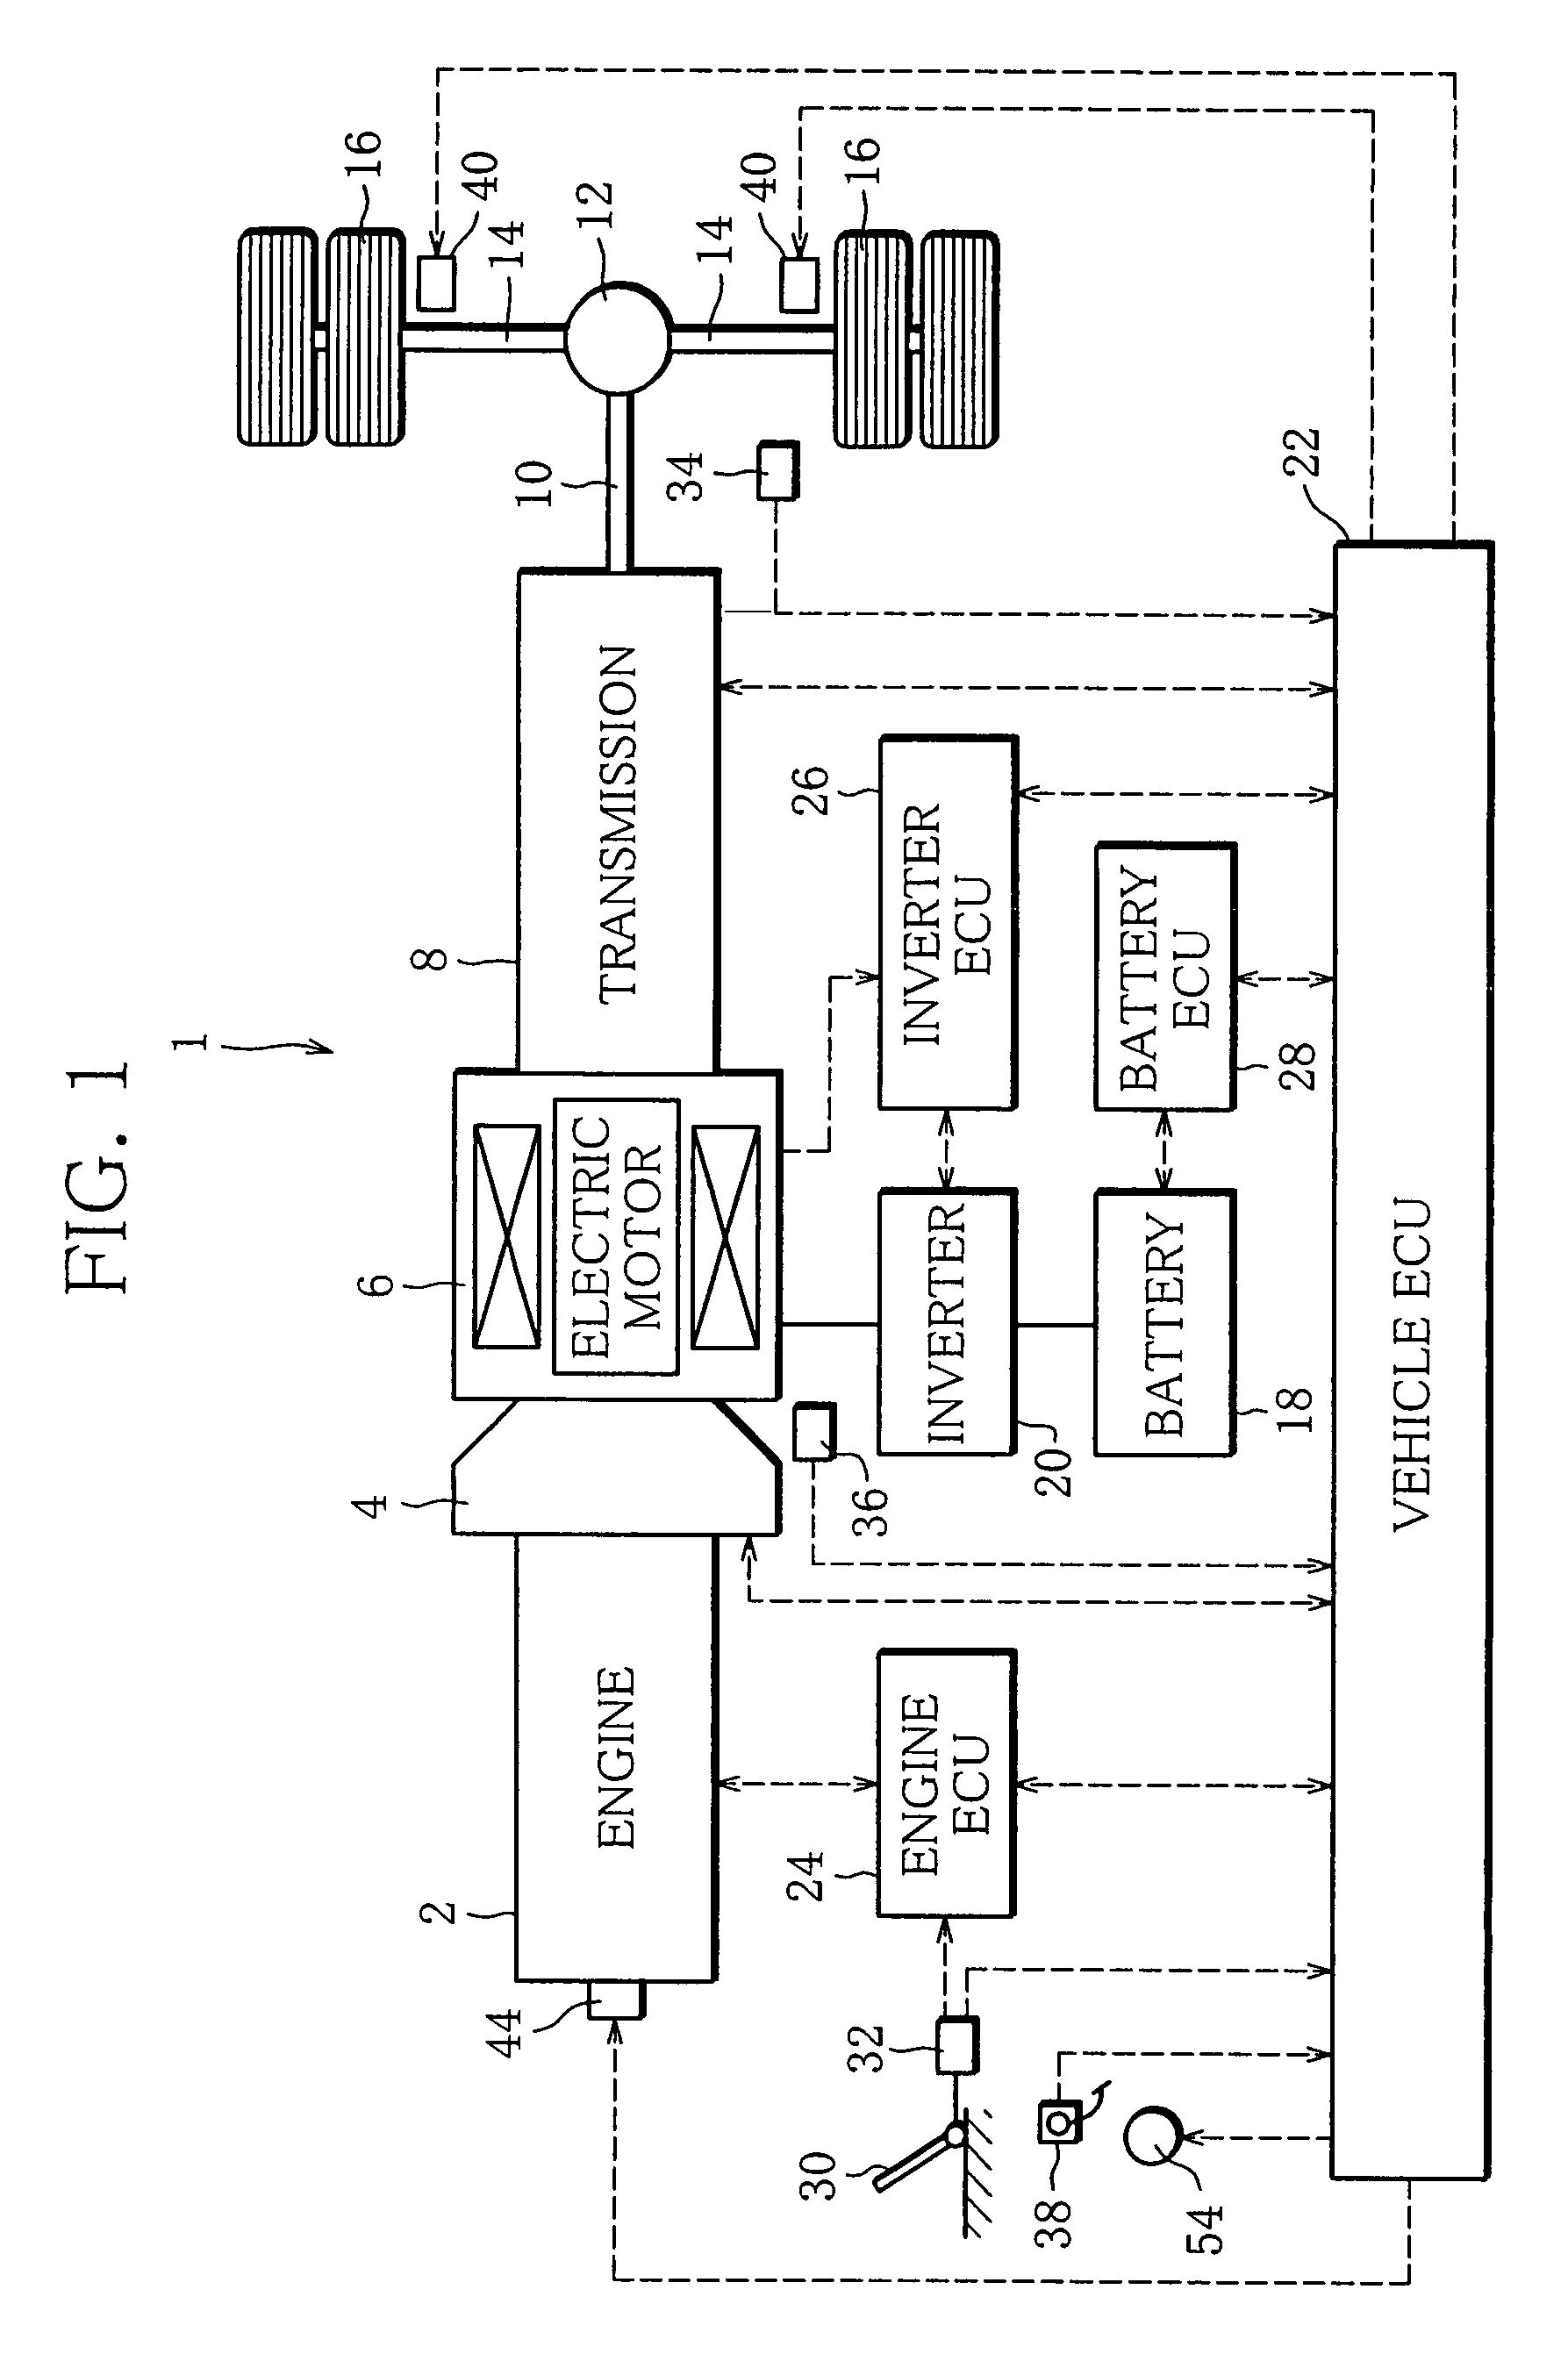 Control device for a hybrid electric vehicle